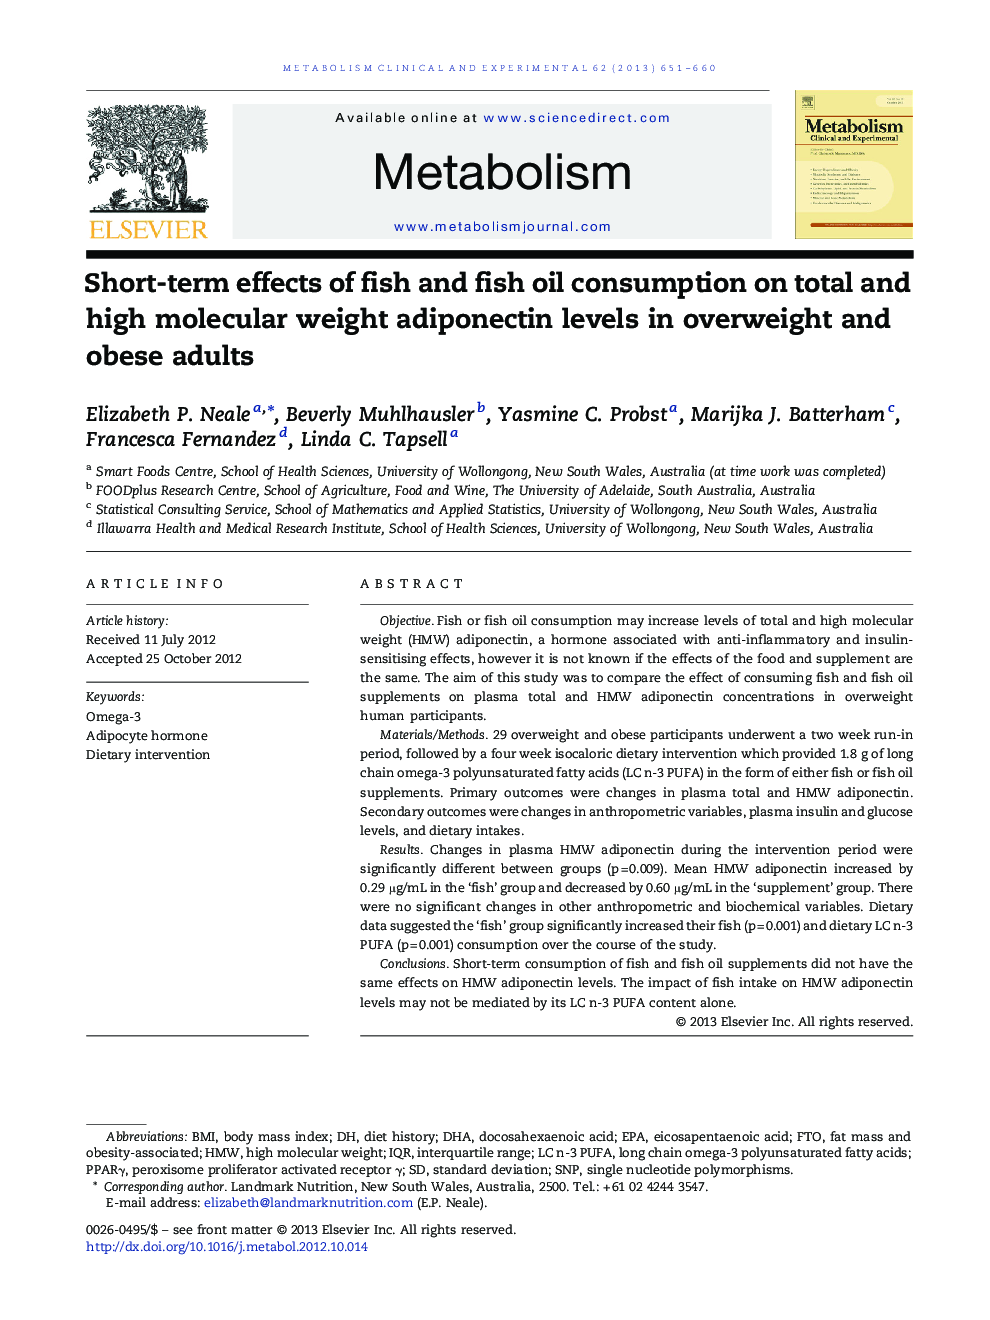 Short-term effects of fish and fish oil consumption on total and high molecular weight adiponectin levels in overweight and obese adults